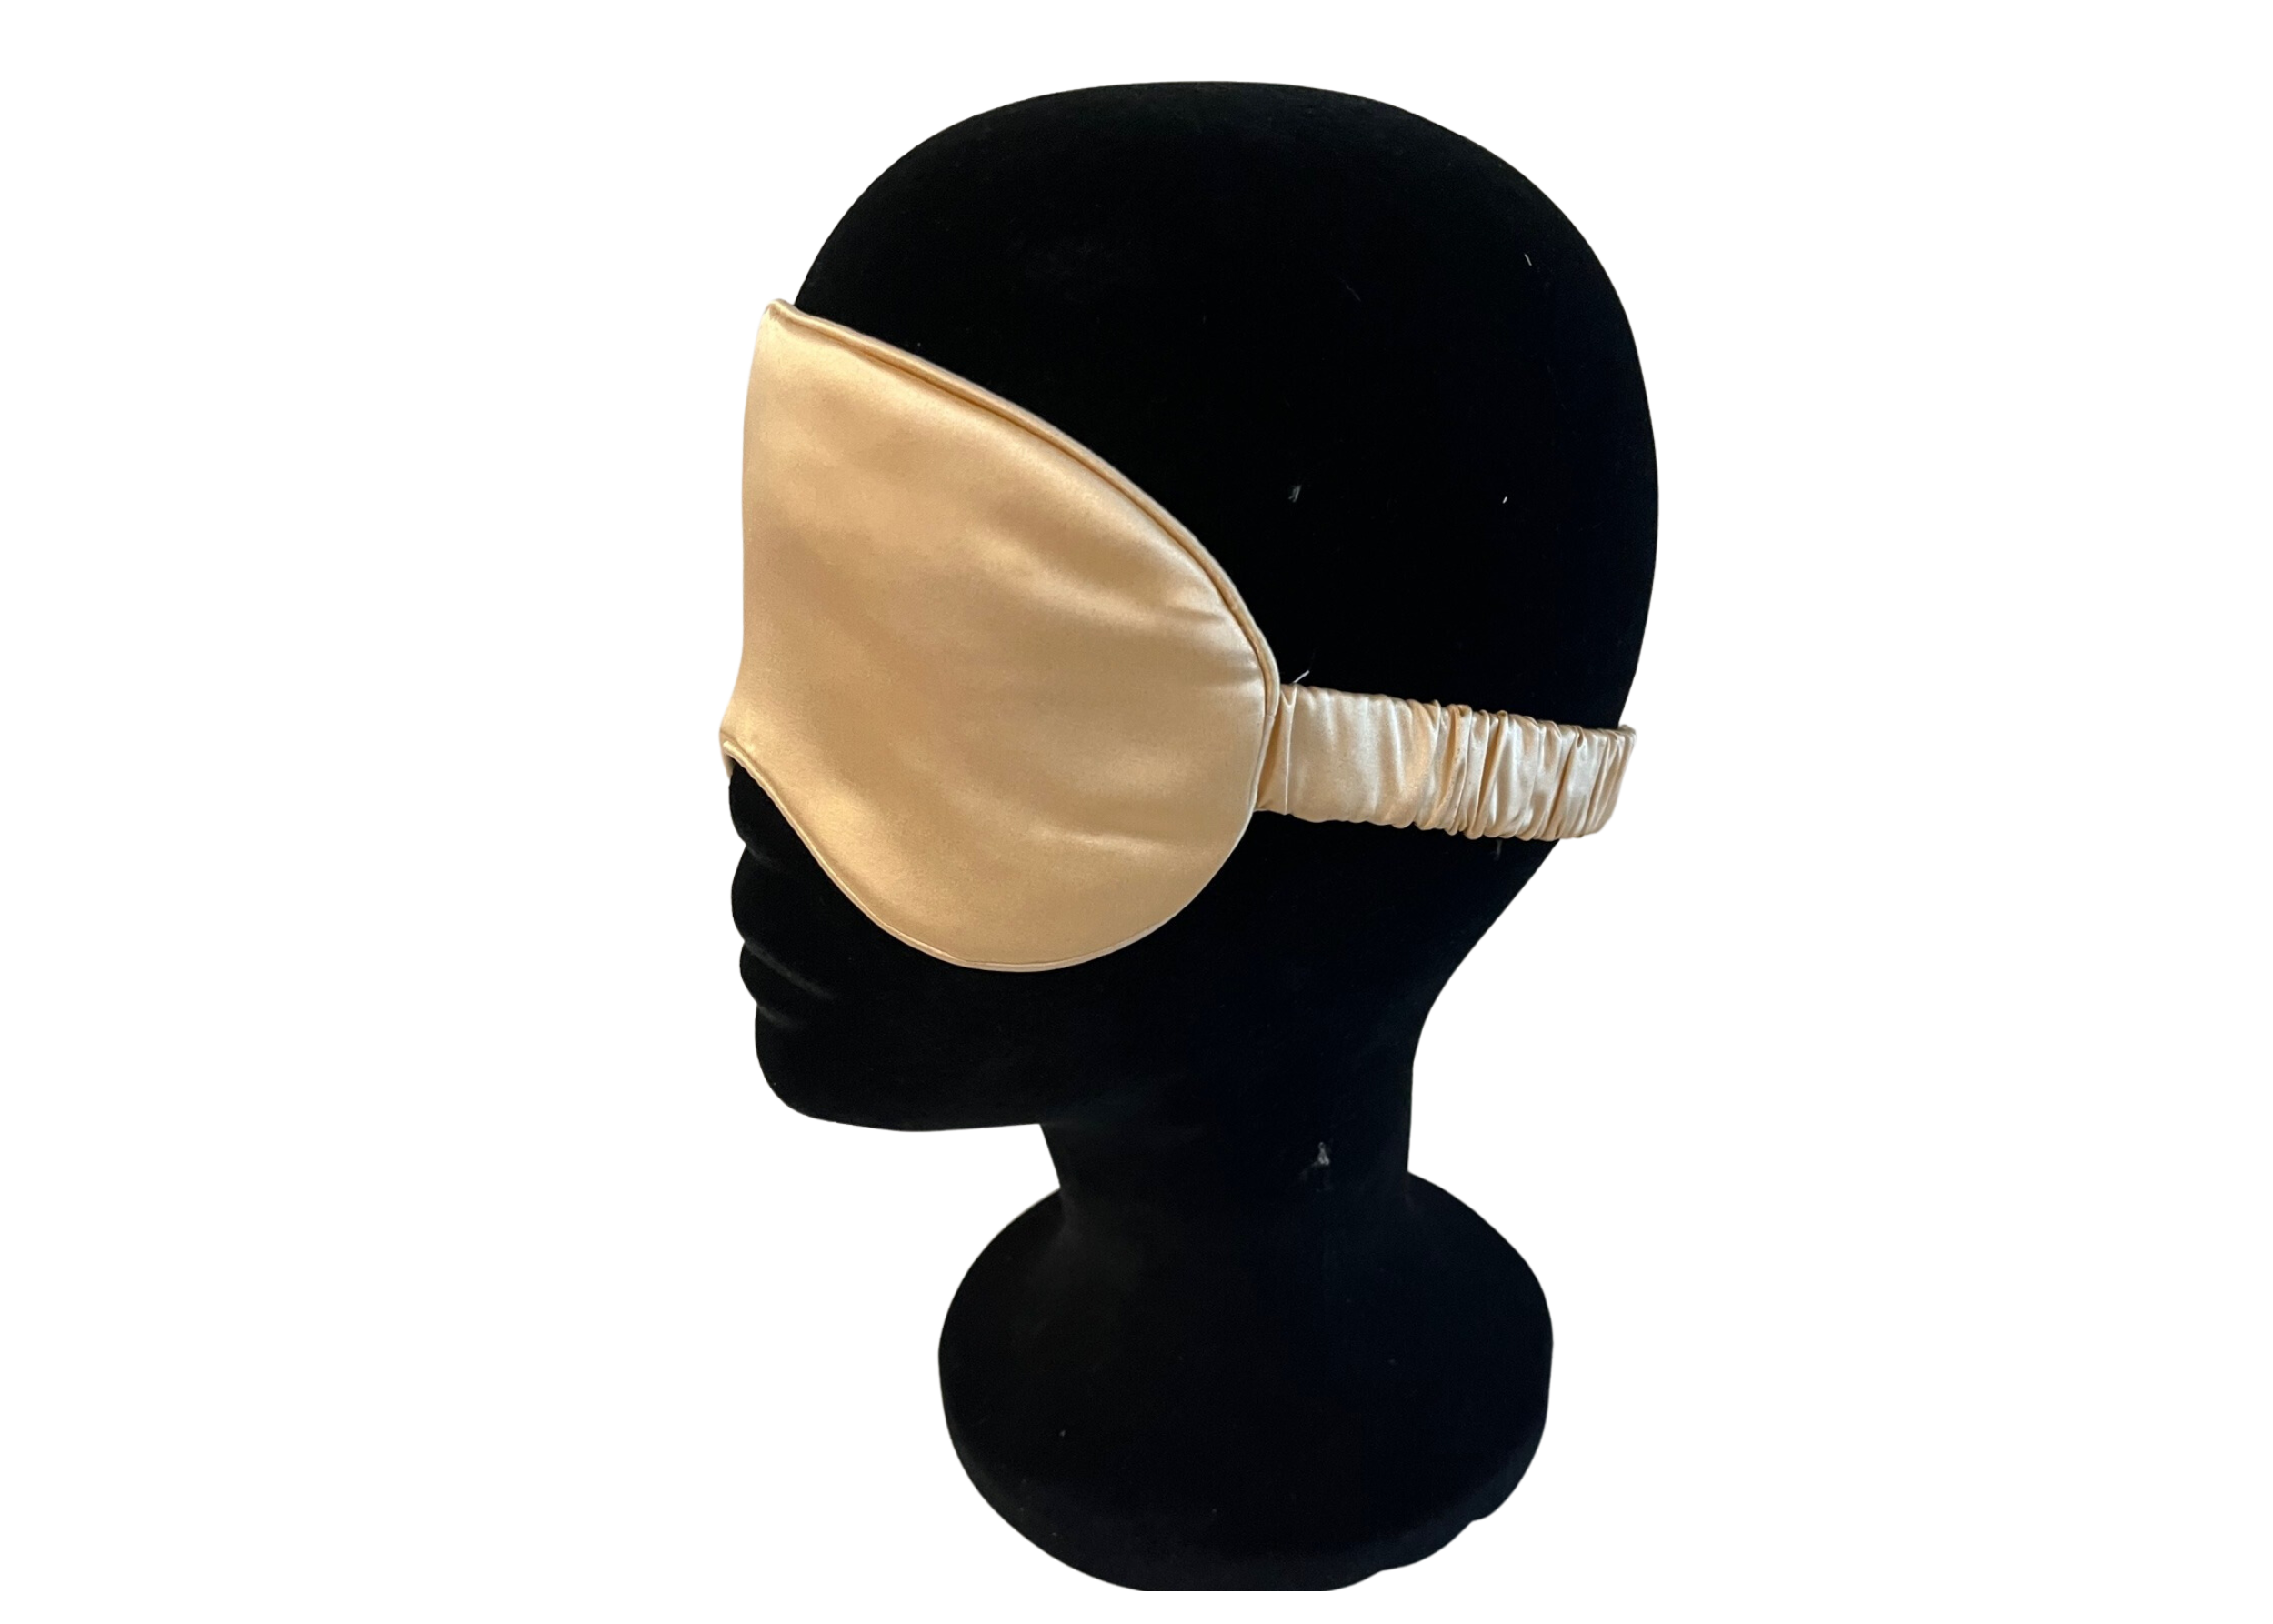  Gold Pure Silk Sleep Mask - Gold Pure Silk Sleep Mask -  -  - Luxurious Fine Silk by Forsters Finery